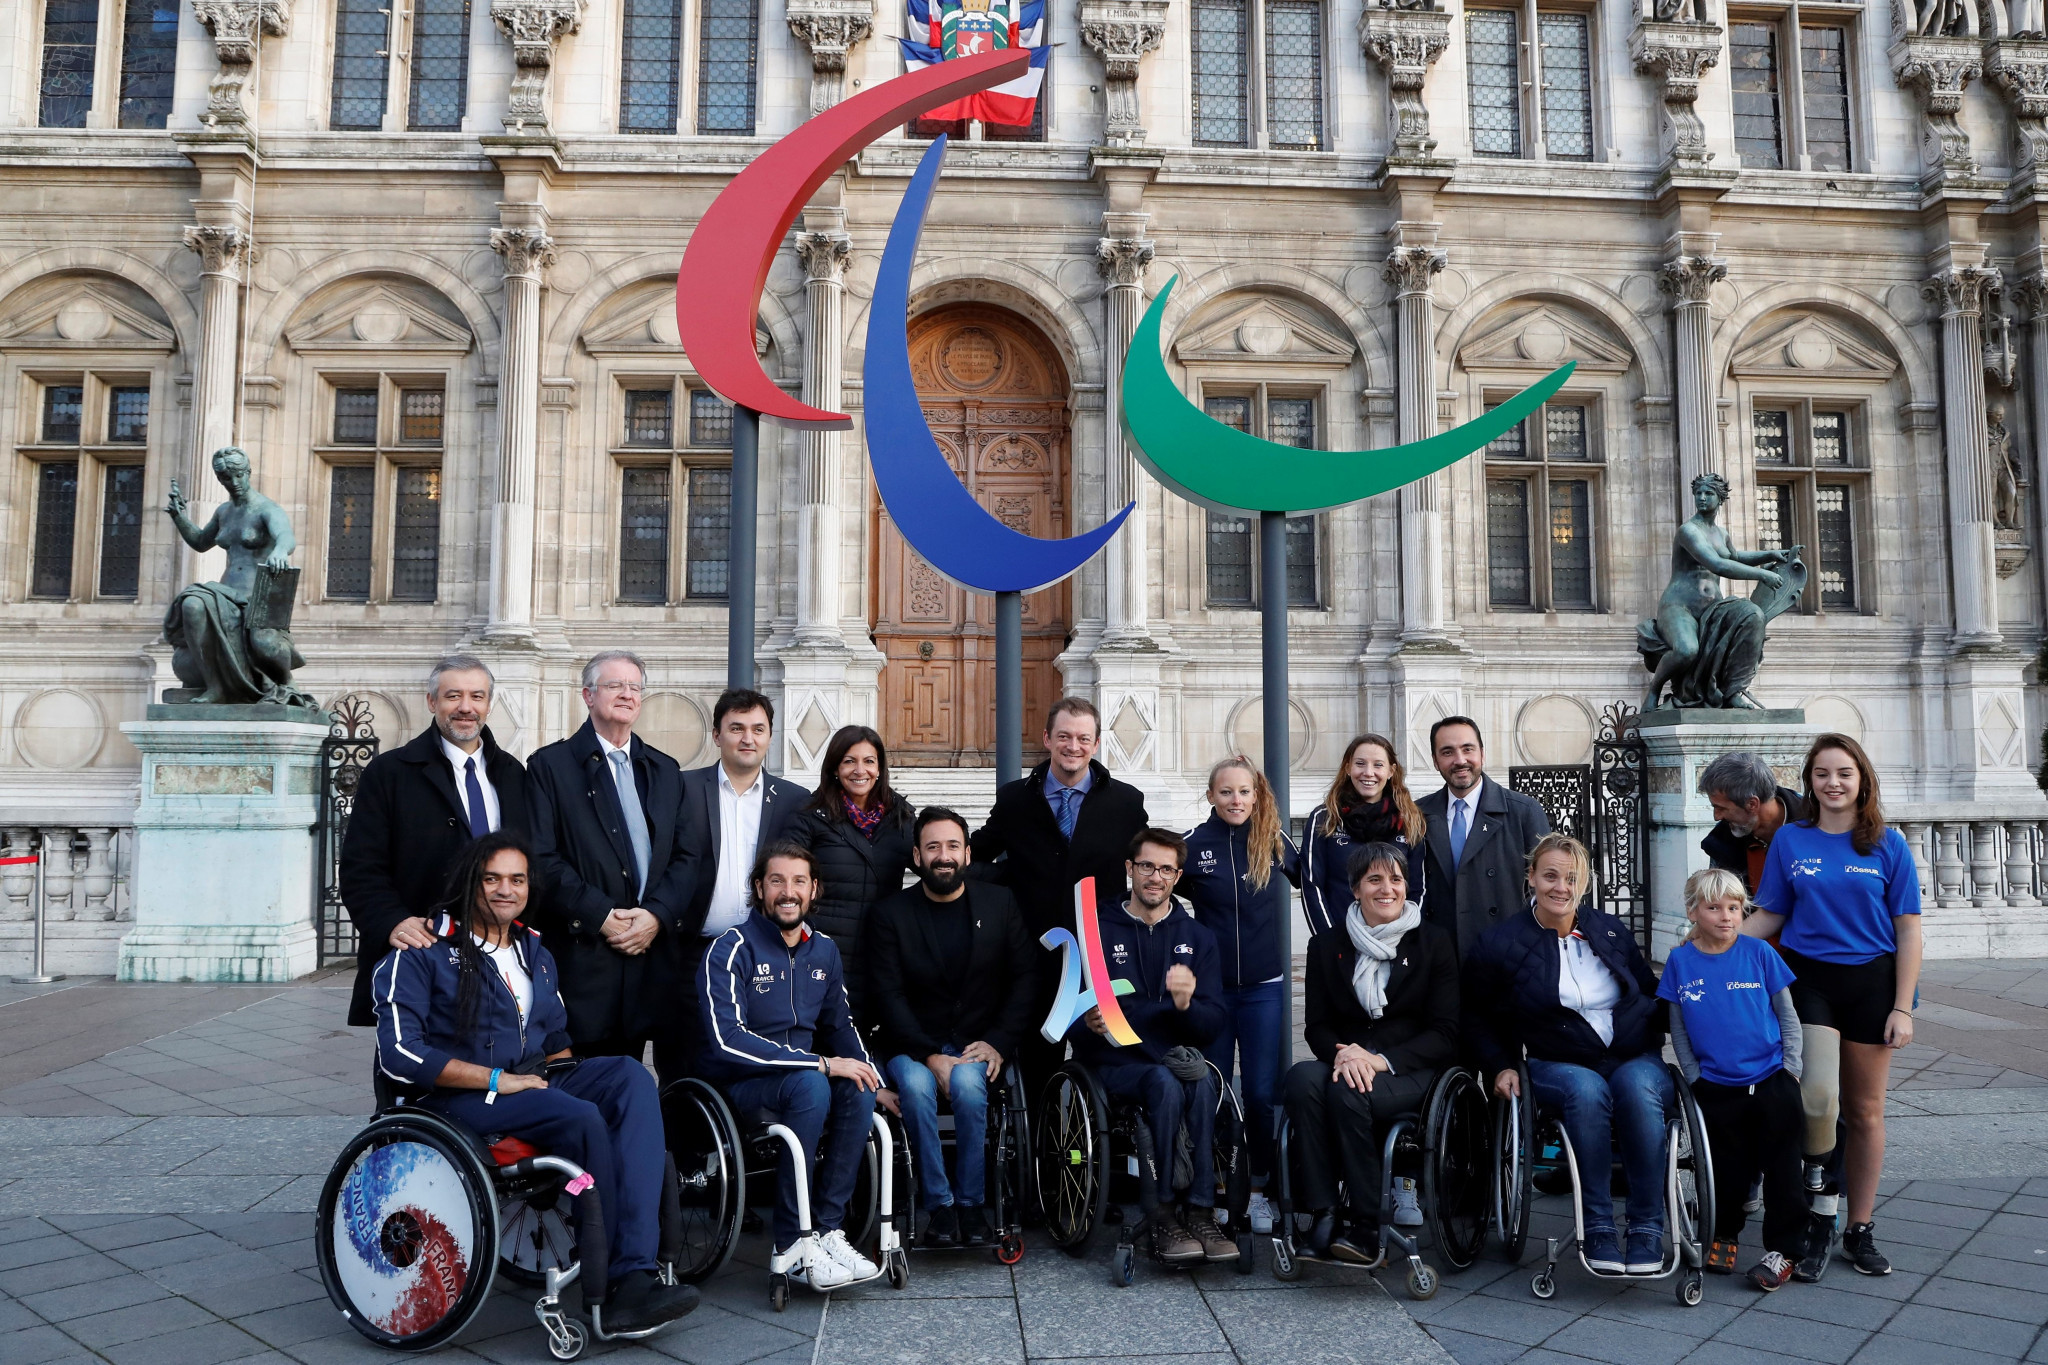 Paris 2024 and IPC commit to using Paralympic Games to shape more